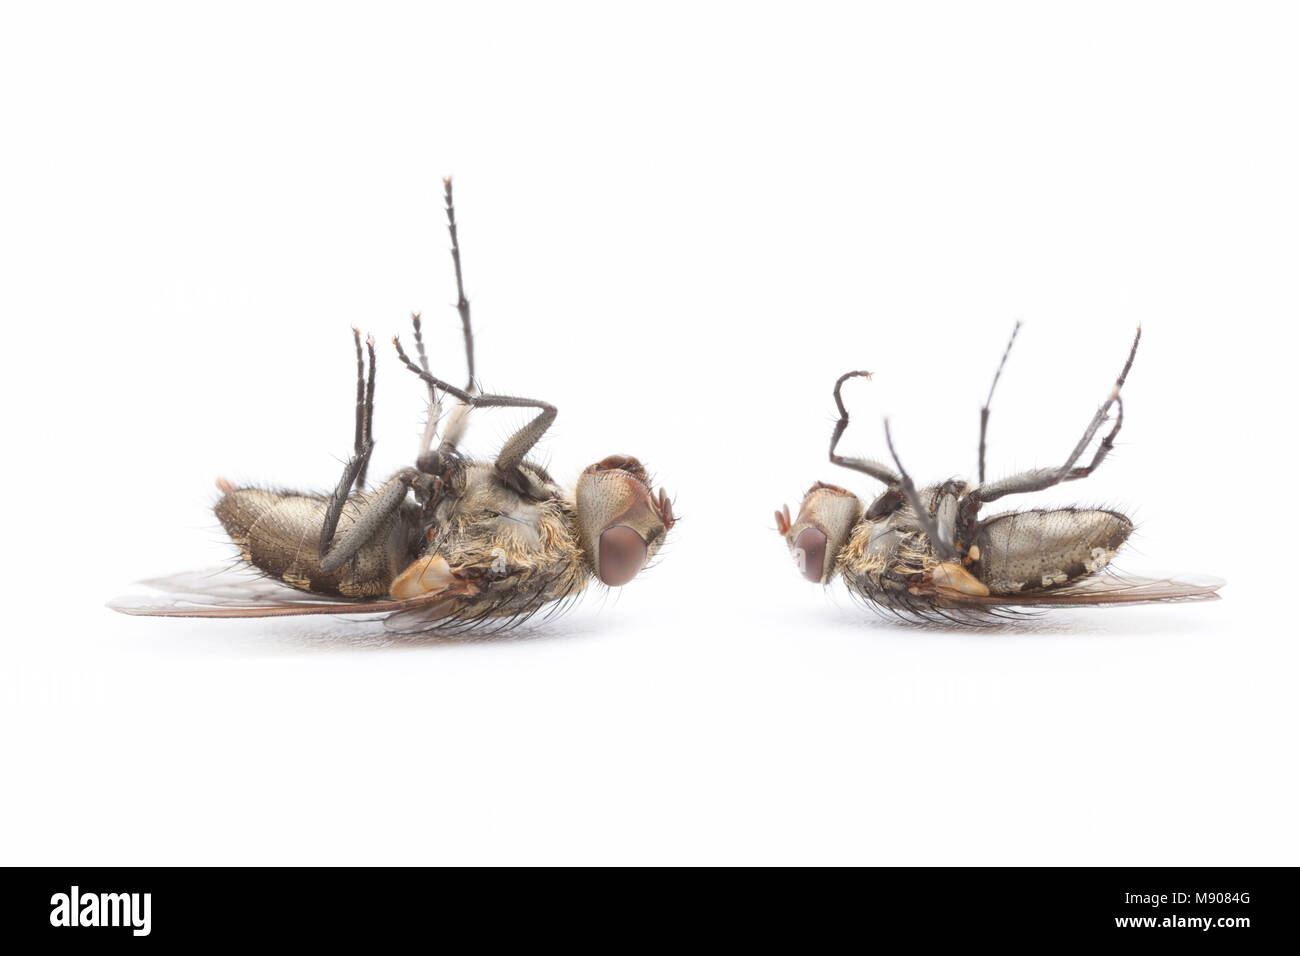 Dead cluster flies, Pollenia rudis,on a white background. These flies can infest homes in large numbers. England UK GB Stock Photo